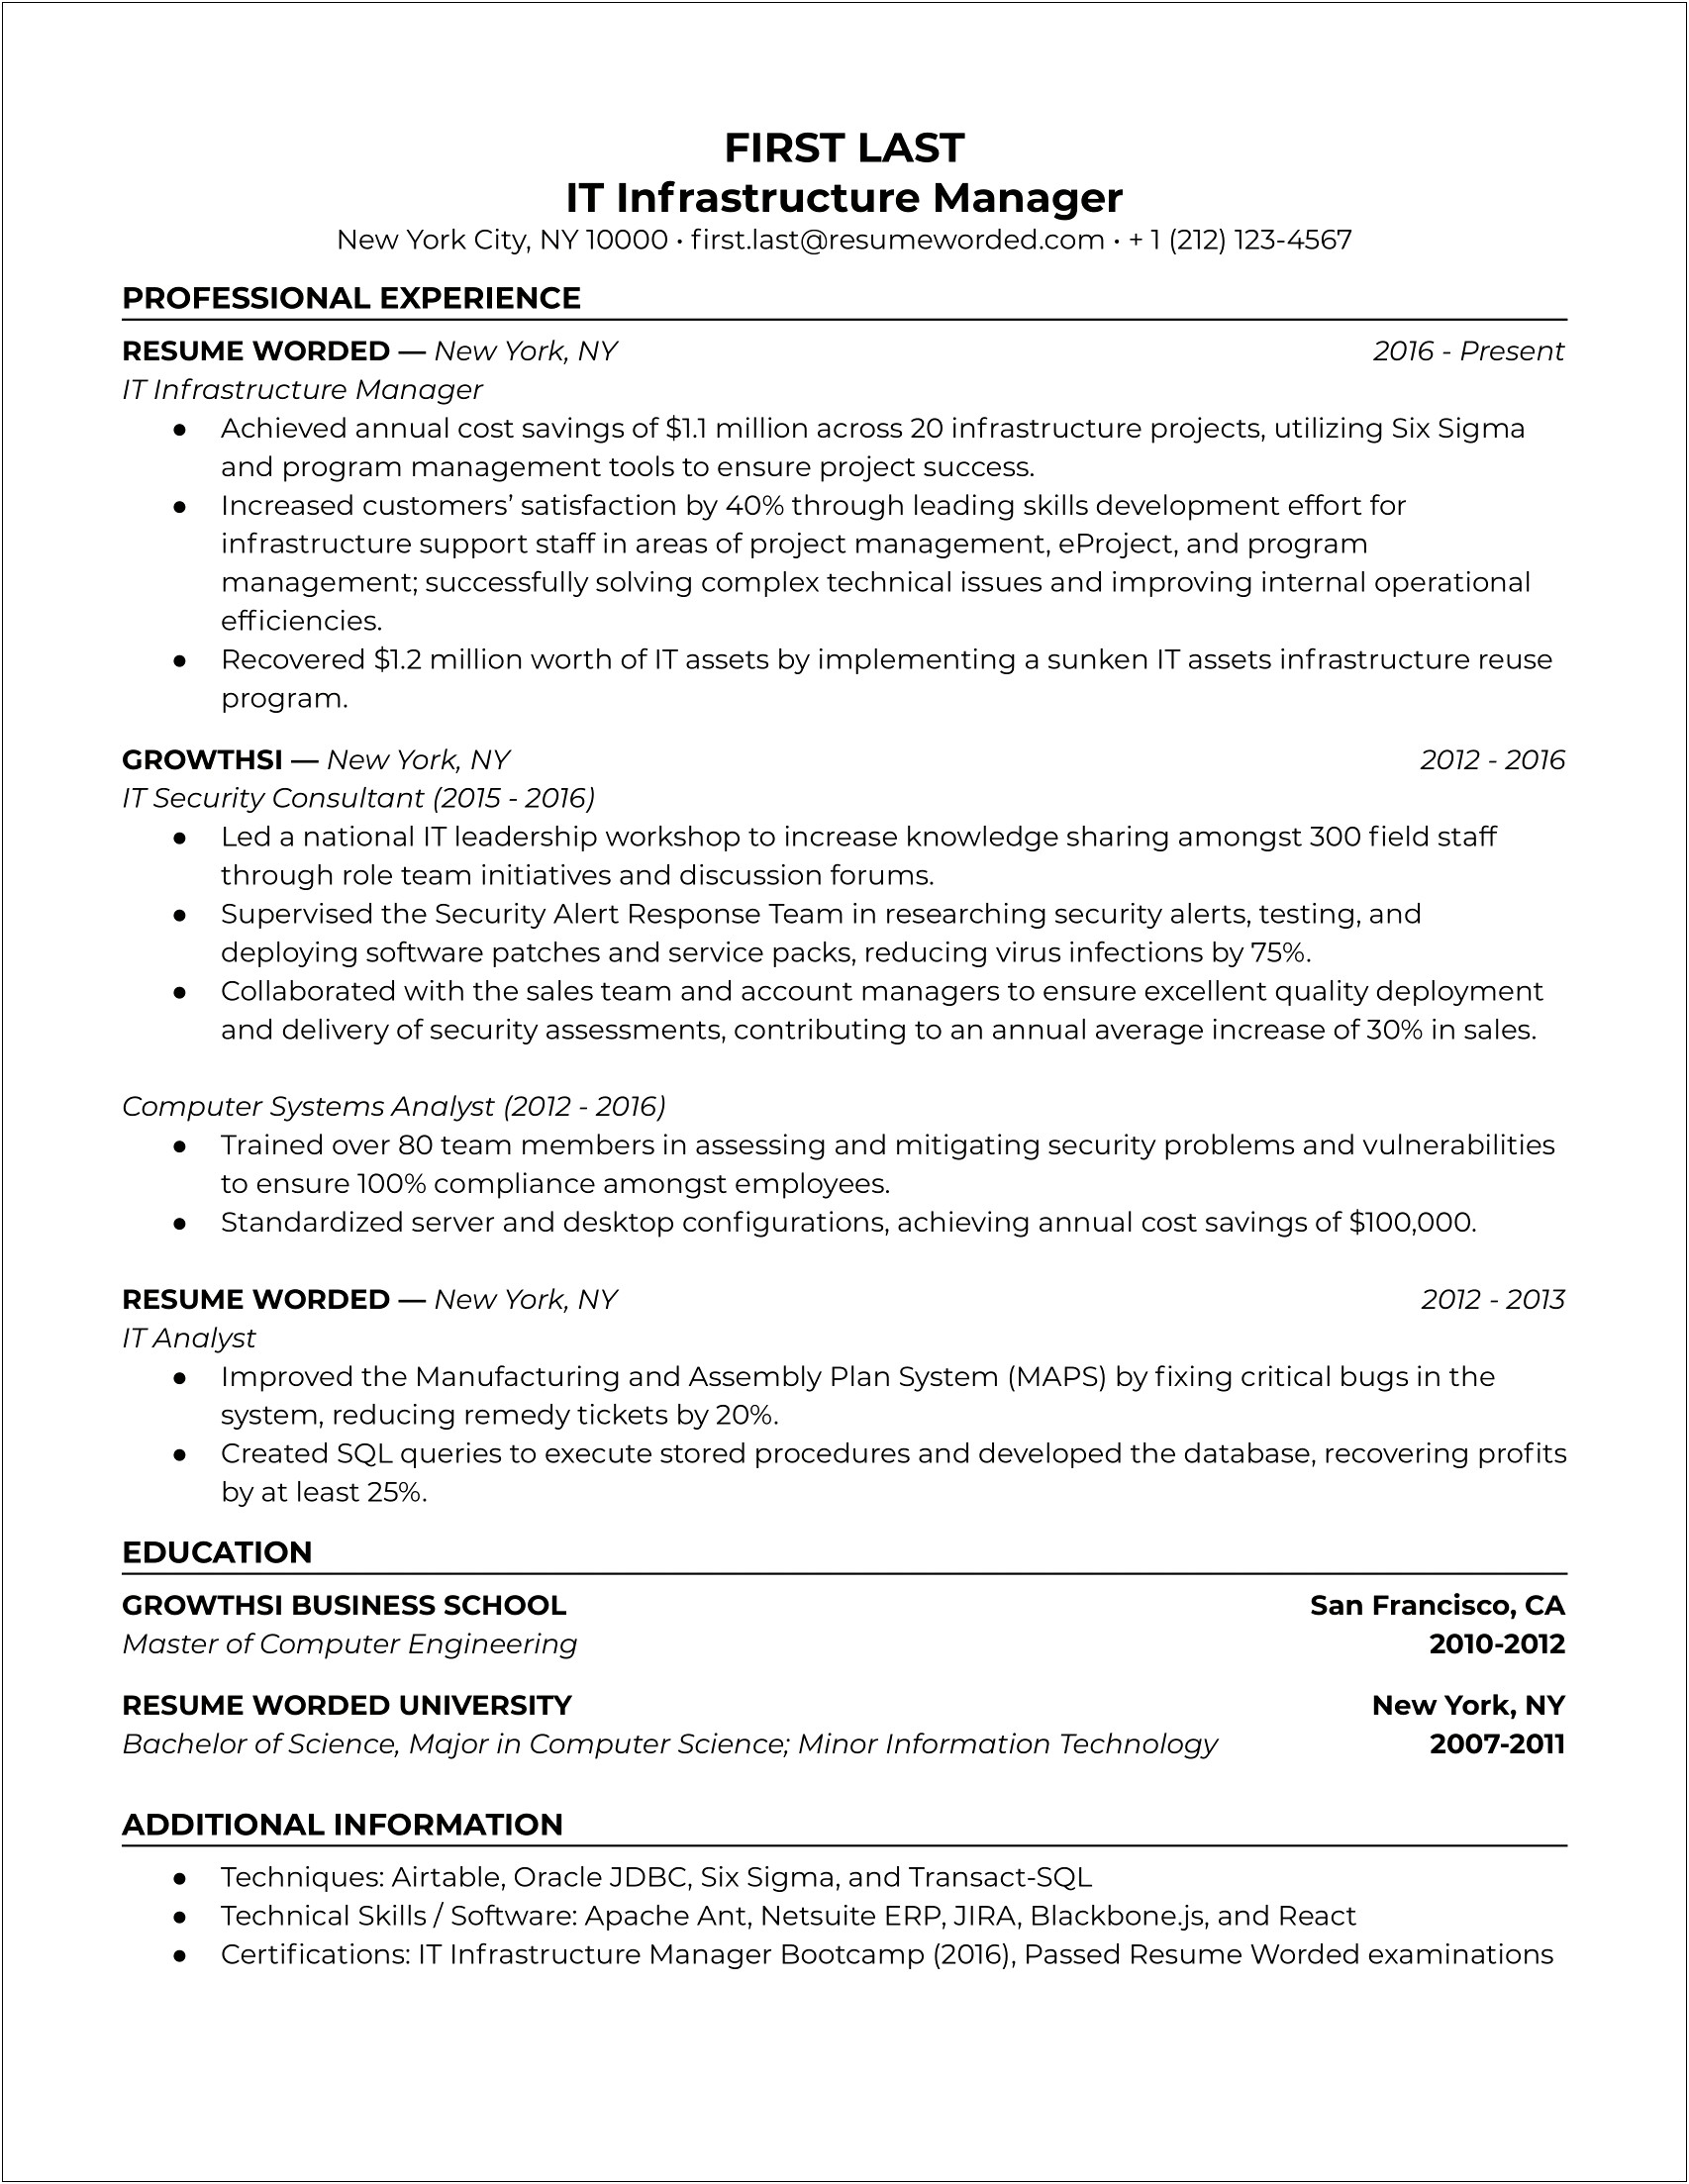 Resume For A Security Manager Position